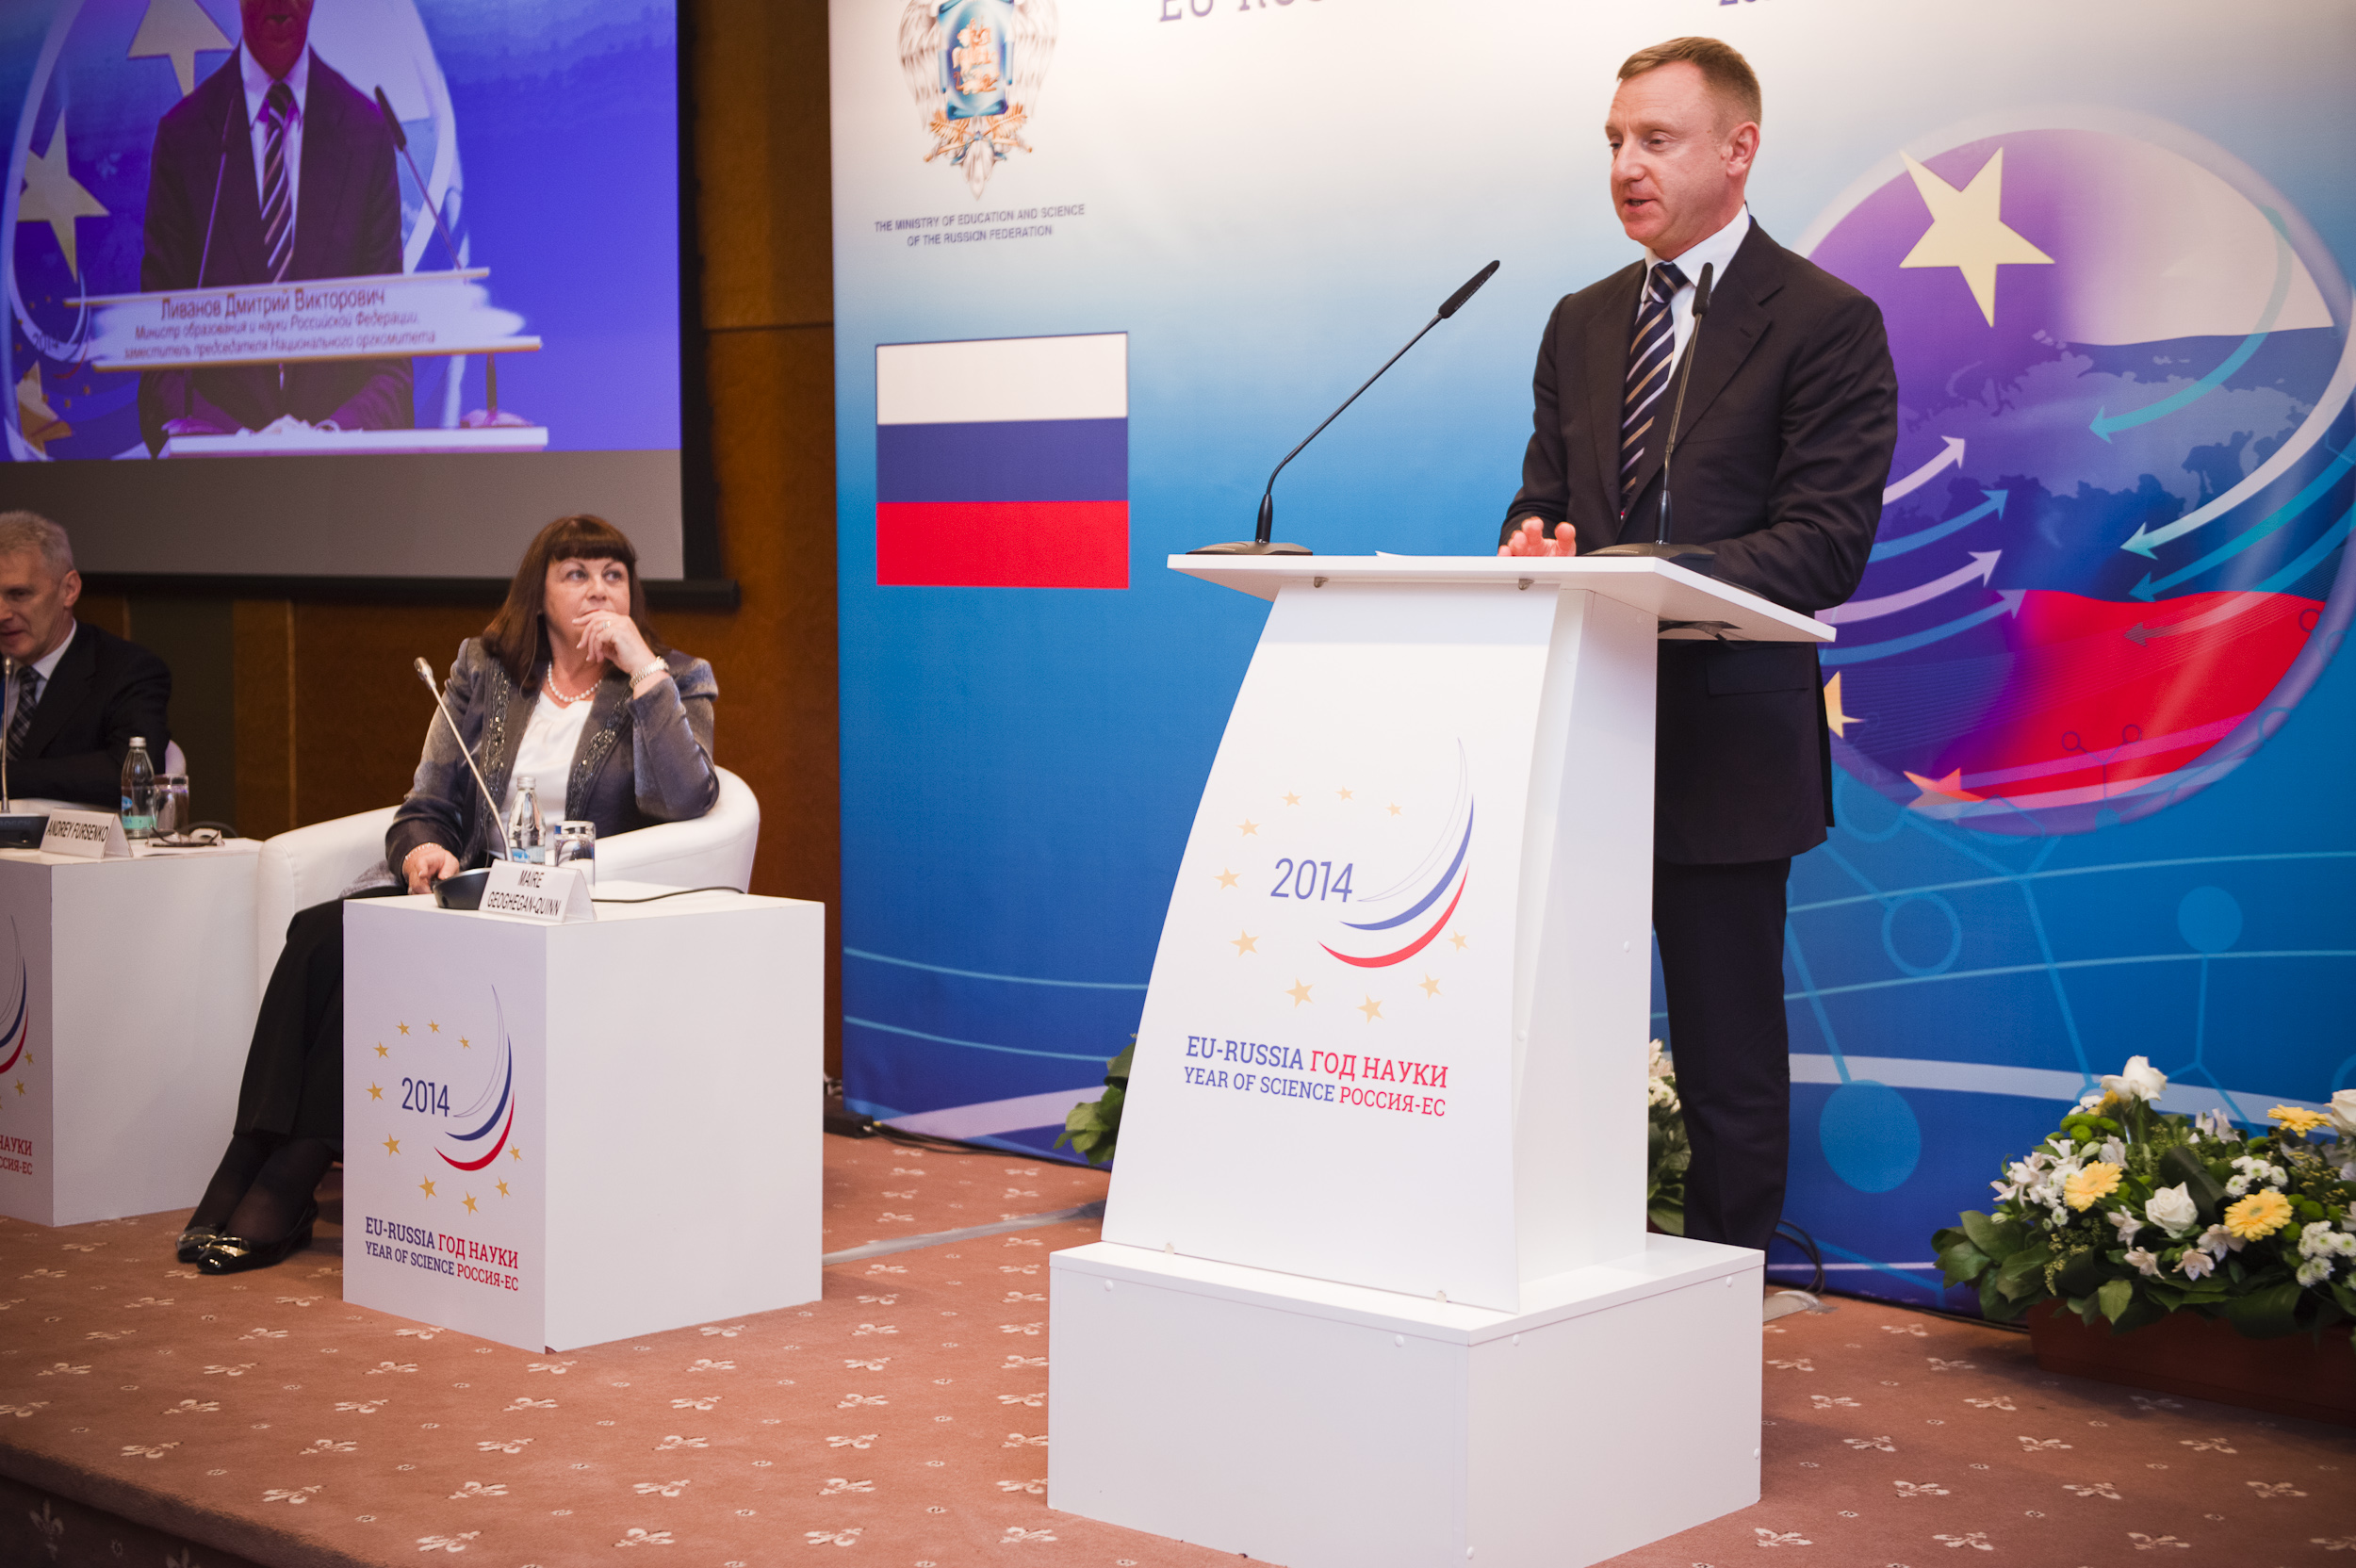 Opening event of EU-Russia Year of Science with science minister Dmitry Livanov and European Commissioner Máire Geoghegan-Quinn